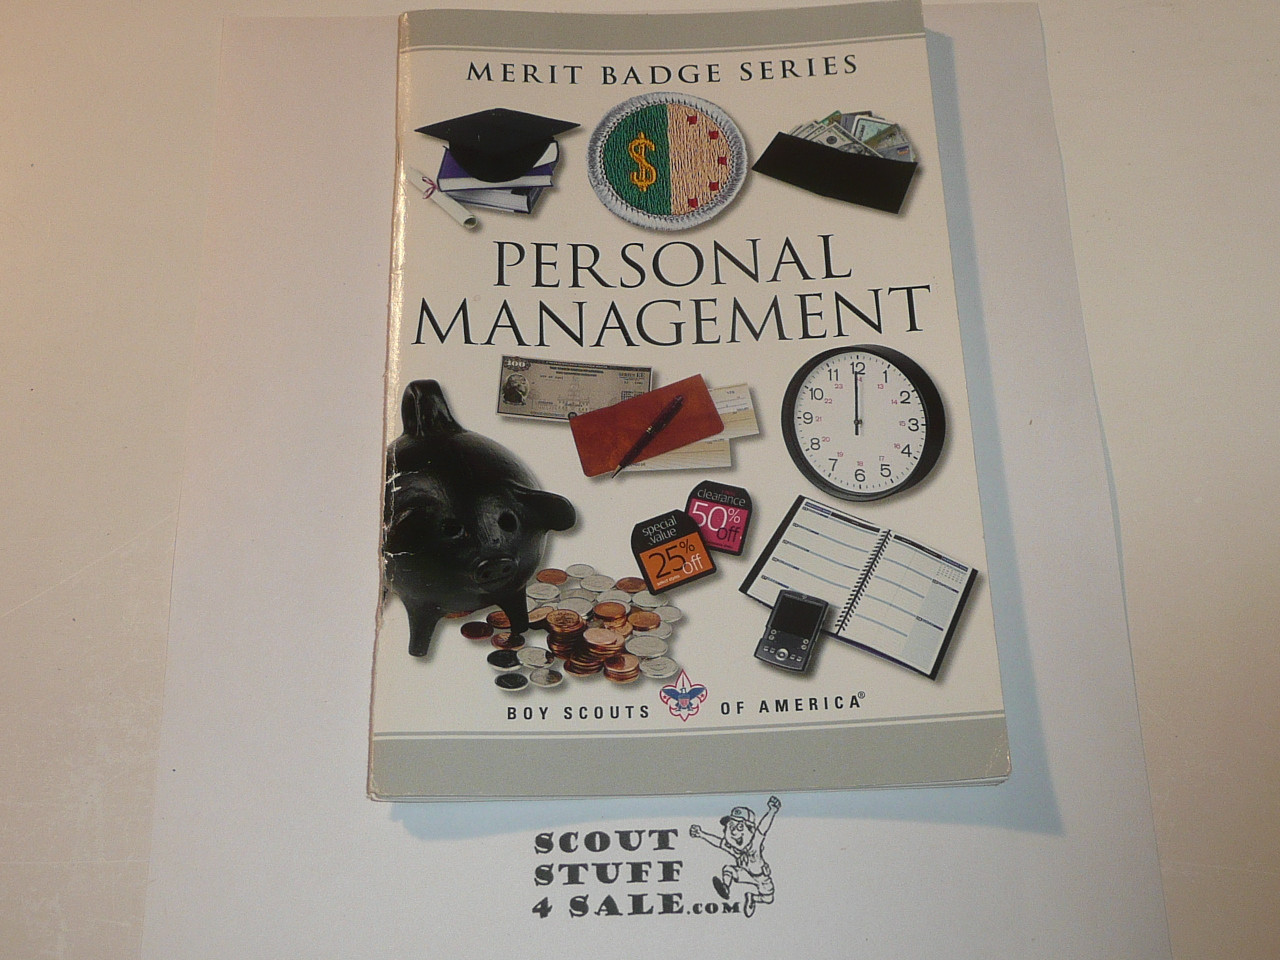 Personal Management Merit Badge Pamphlet, Type 10, Montage of Pictures Cover, 2008 Printing